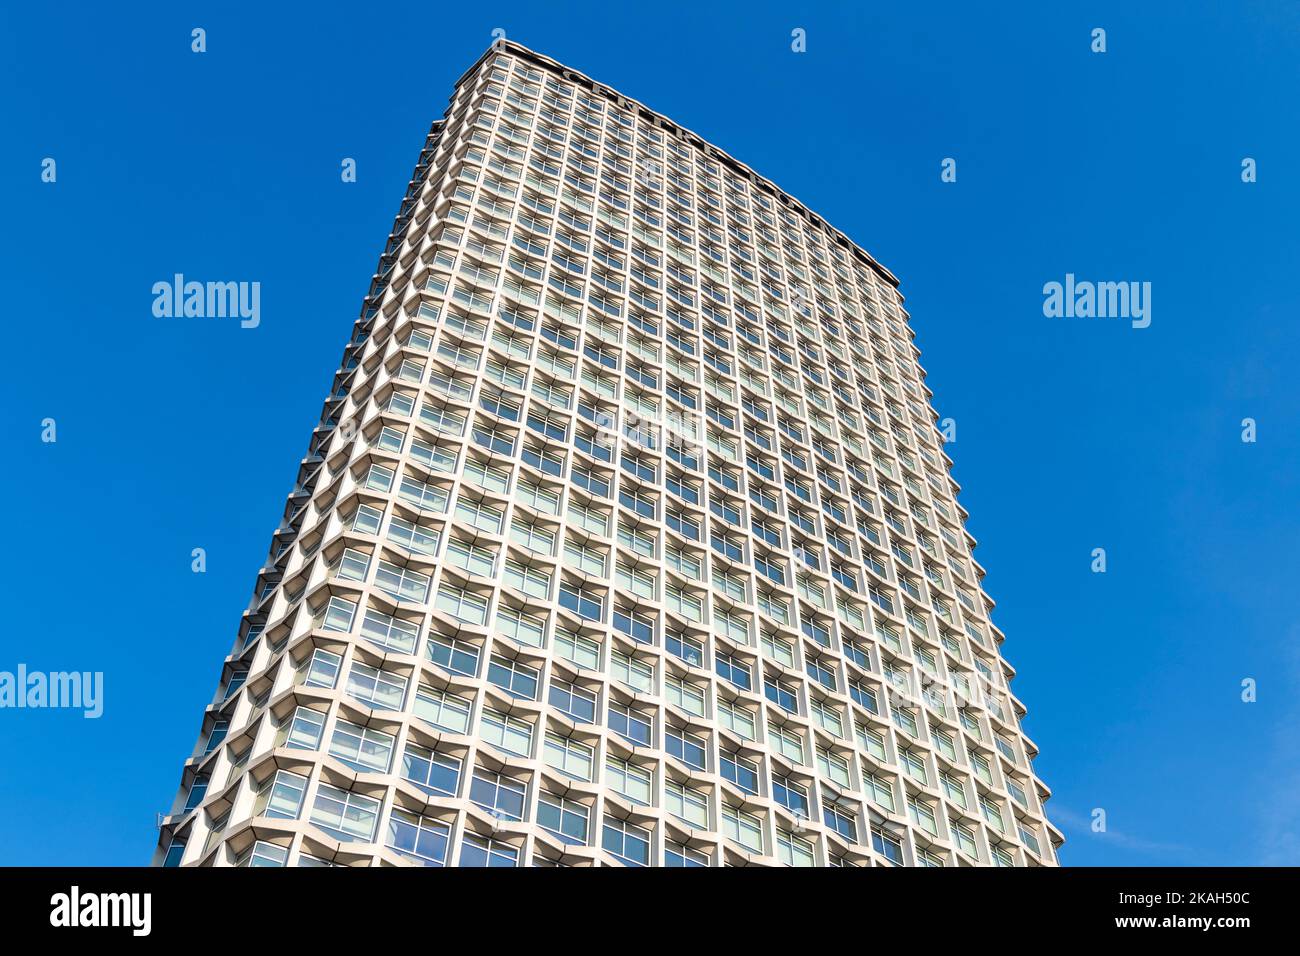 Centre Point skyscraper, at the junction of Charing Cross Road, Oxford Street, Tottenham Court Road and New Oxford Street, London, UK.  The 117 m (385 Stock Photo